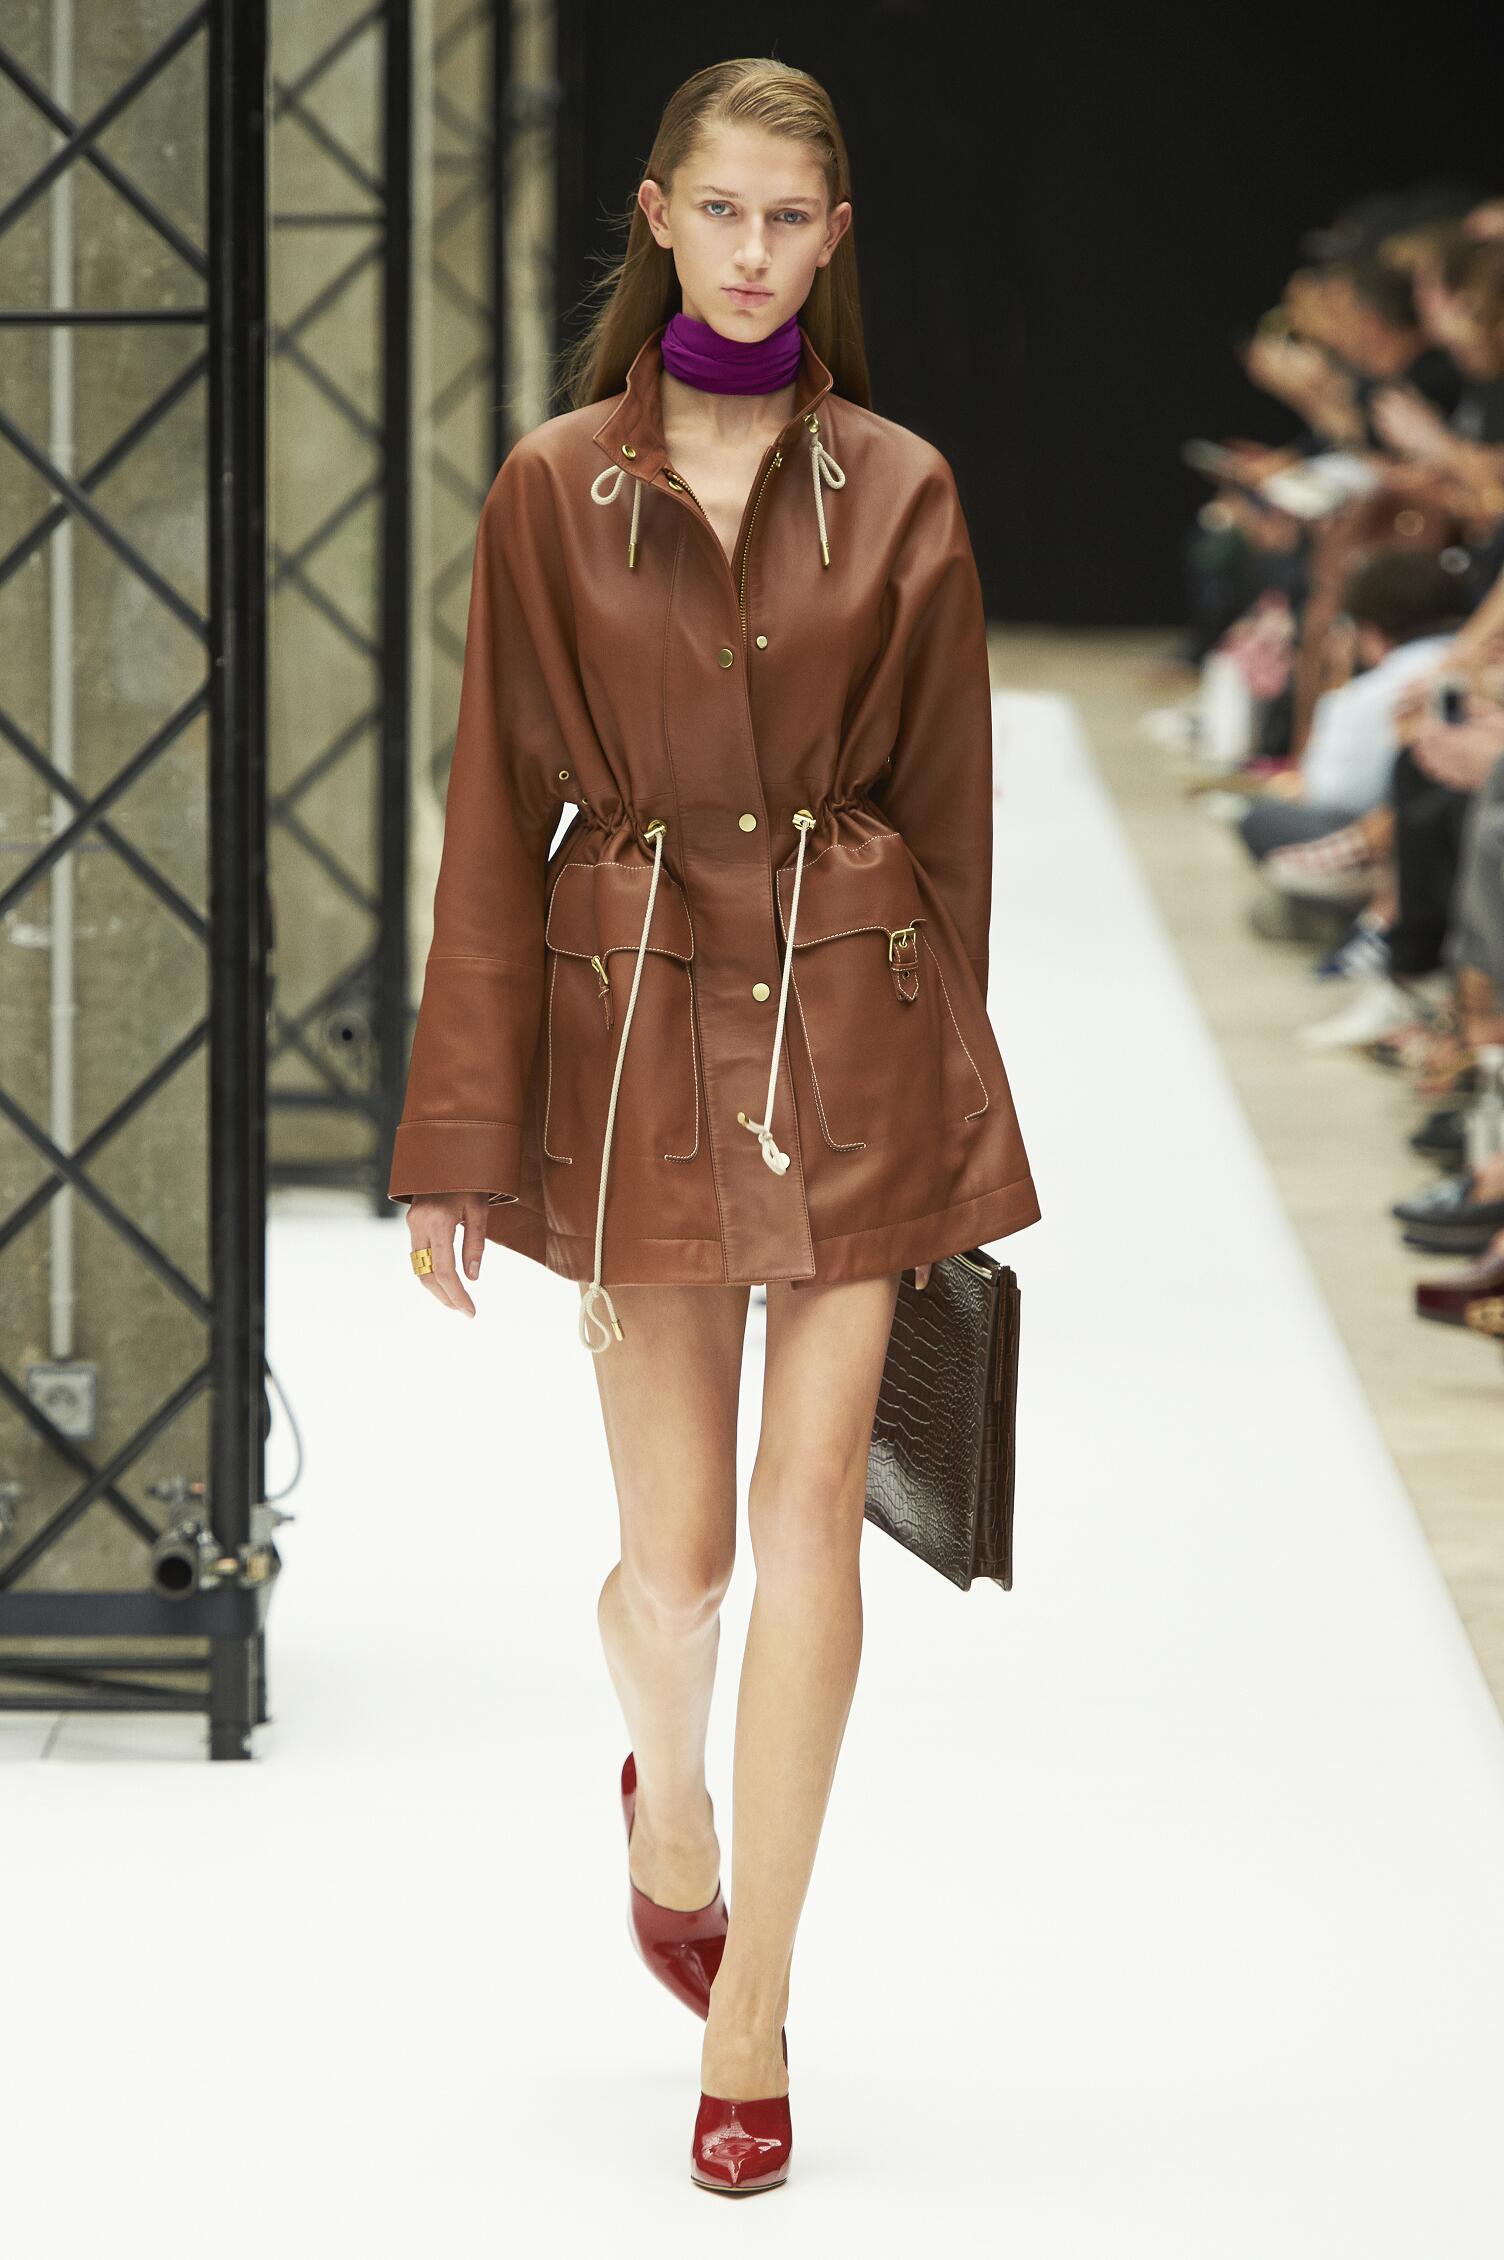 ACNE STUDIOS SPRING SUMMER 2015 WOMENS COLLECTION | The 